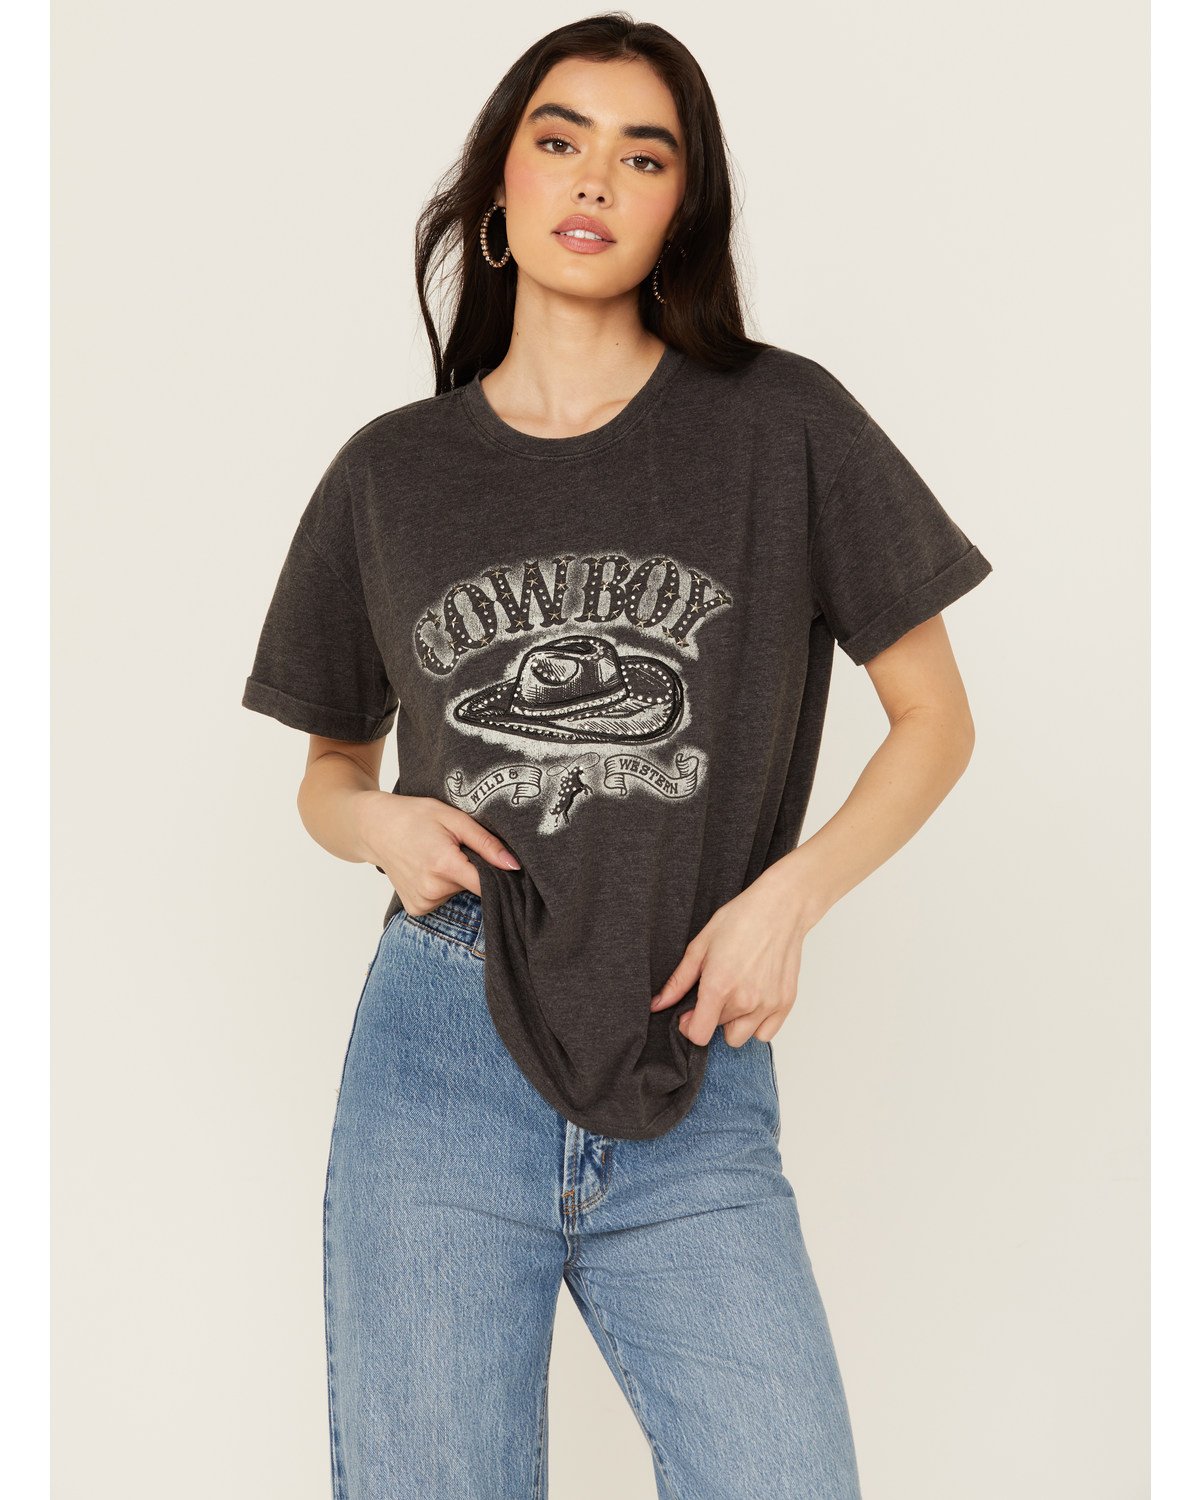 Blended Women's Cowboy Embroidered Graphic T-Shirt